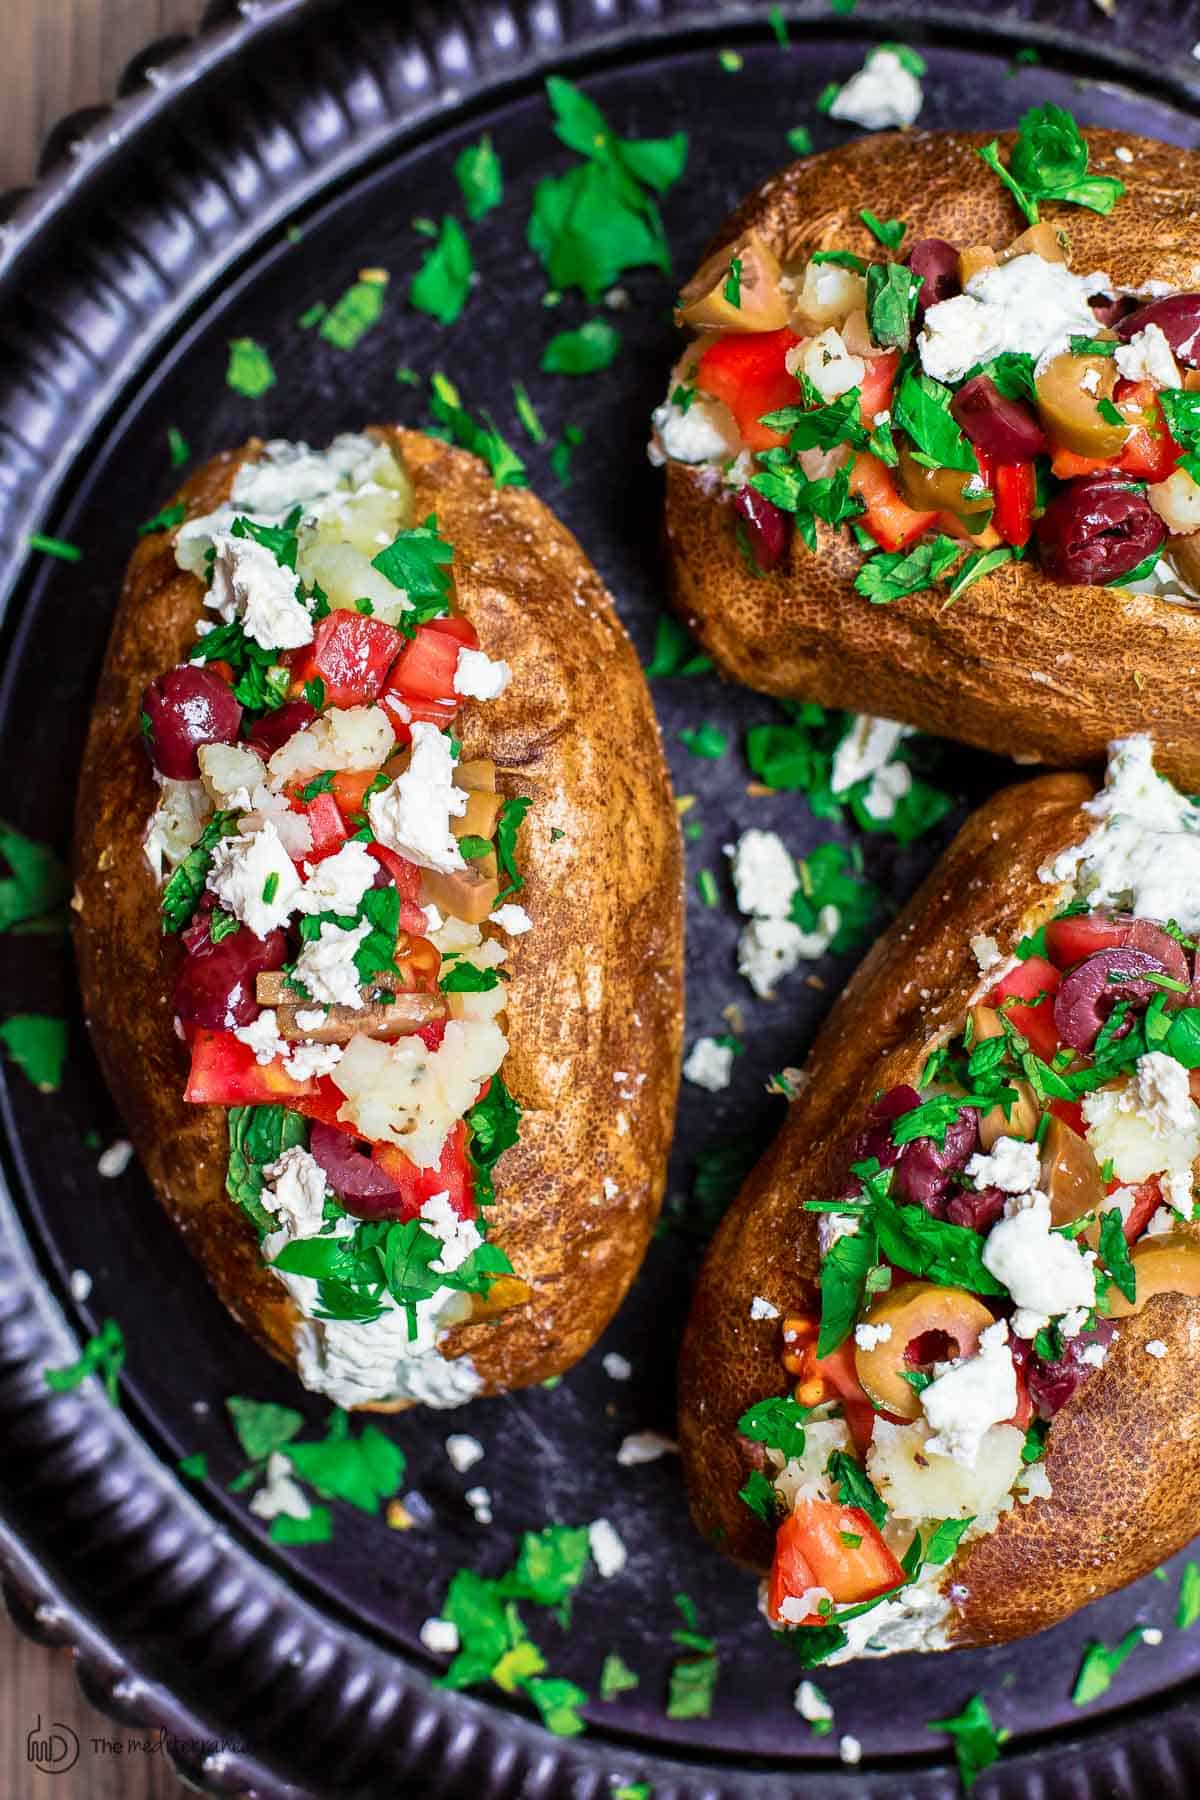 Baked potato, loaded with tztaziki sauce and other Mediterranean toppings